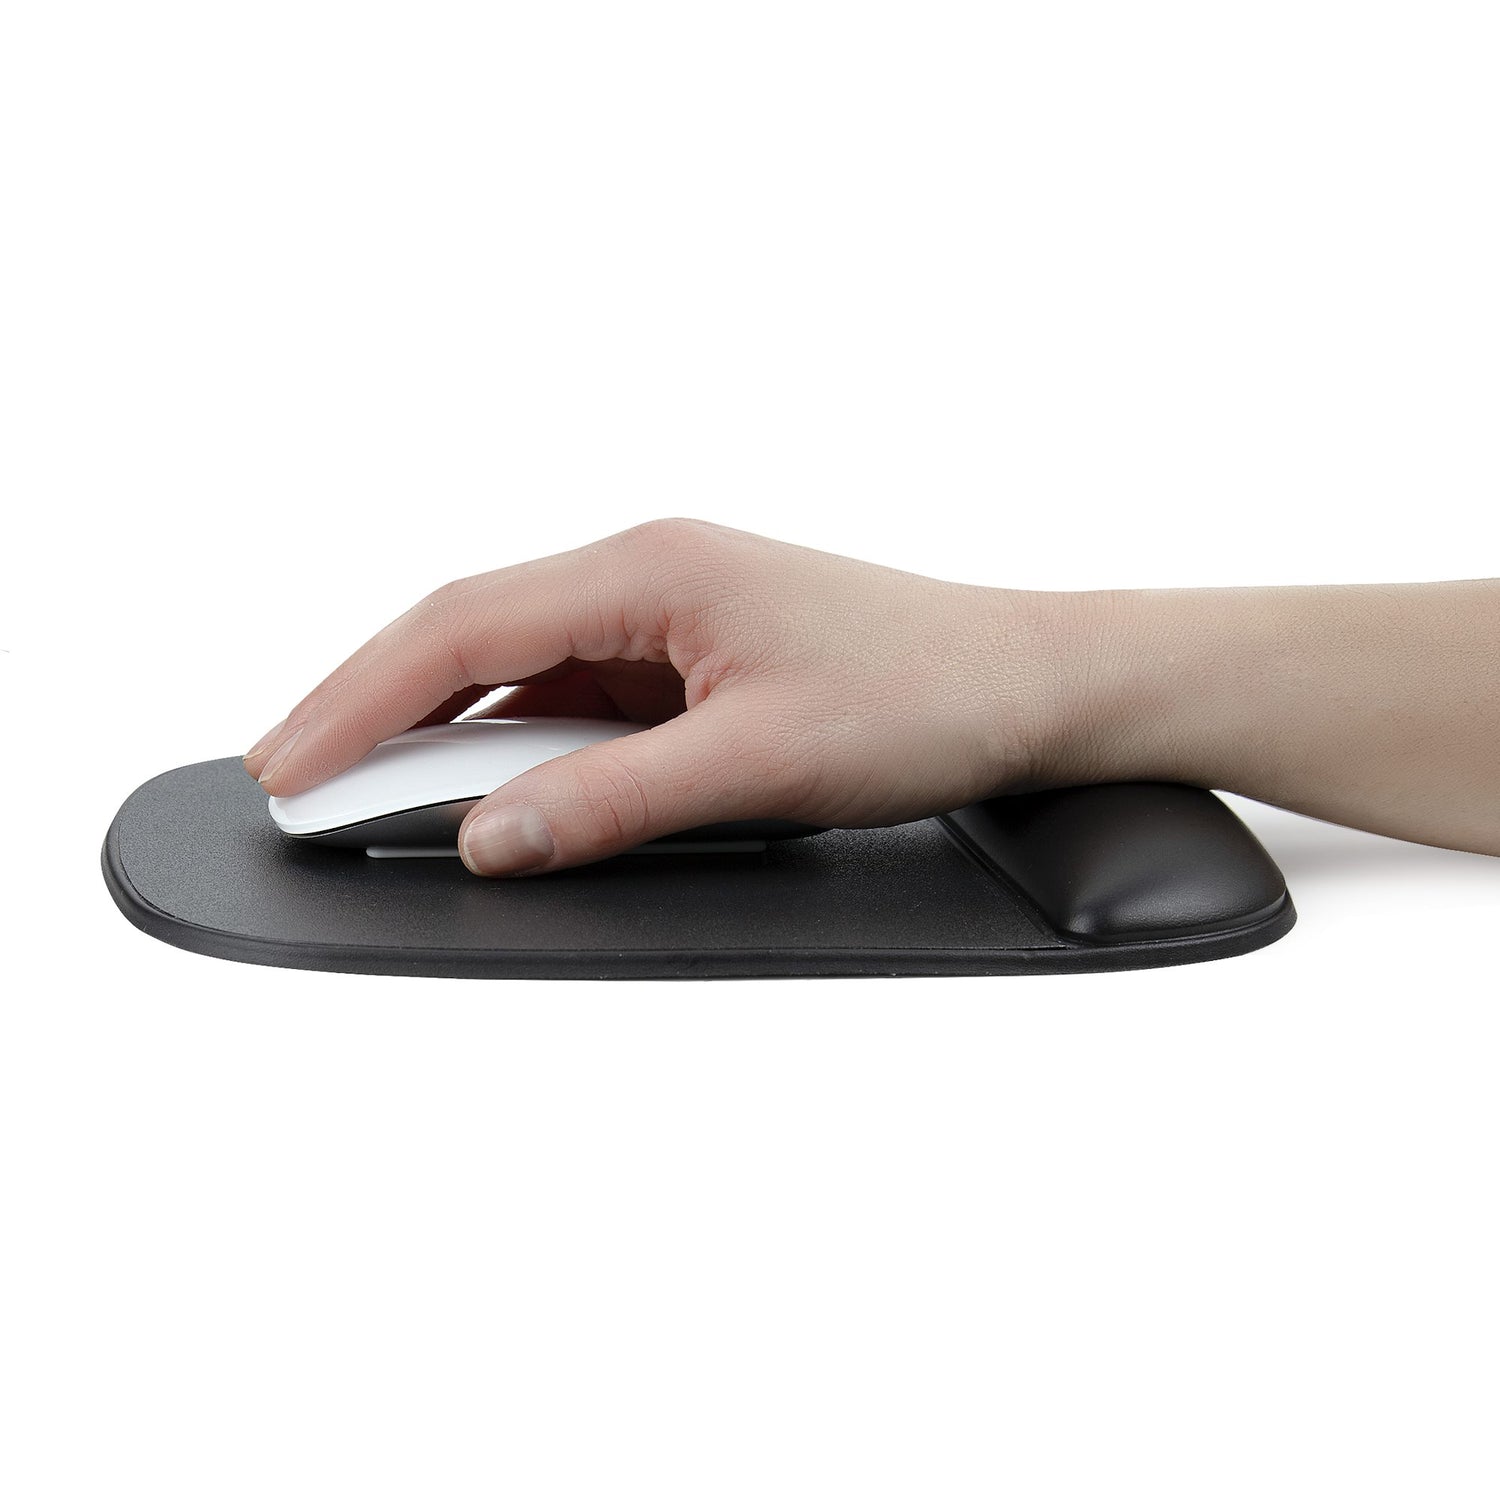 Comfortable mouse pad with wrist rest.